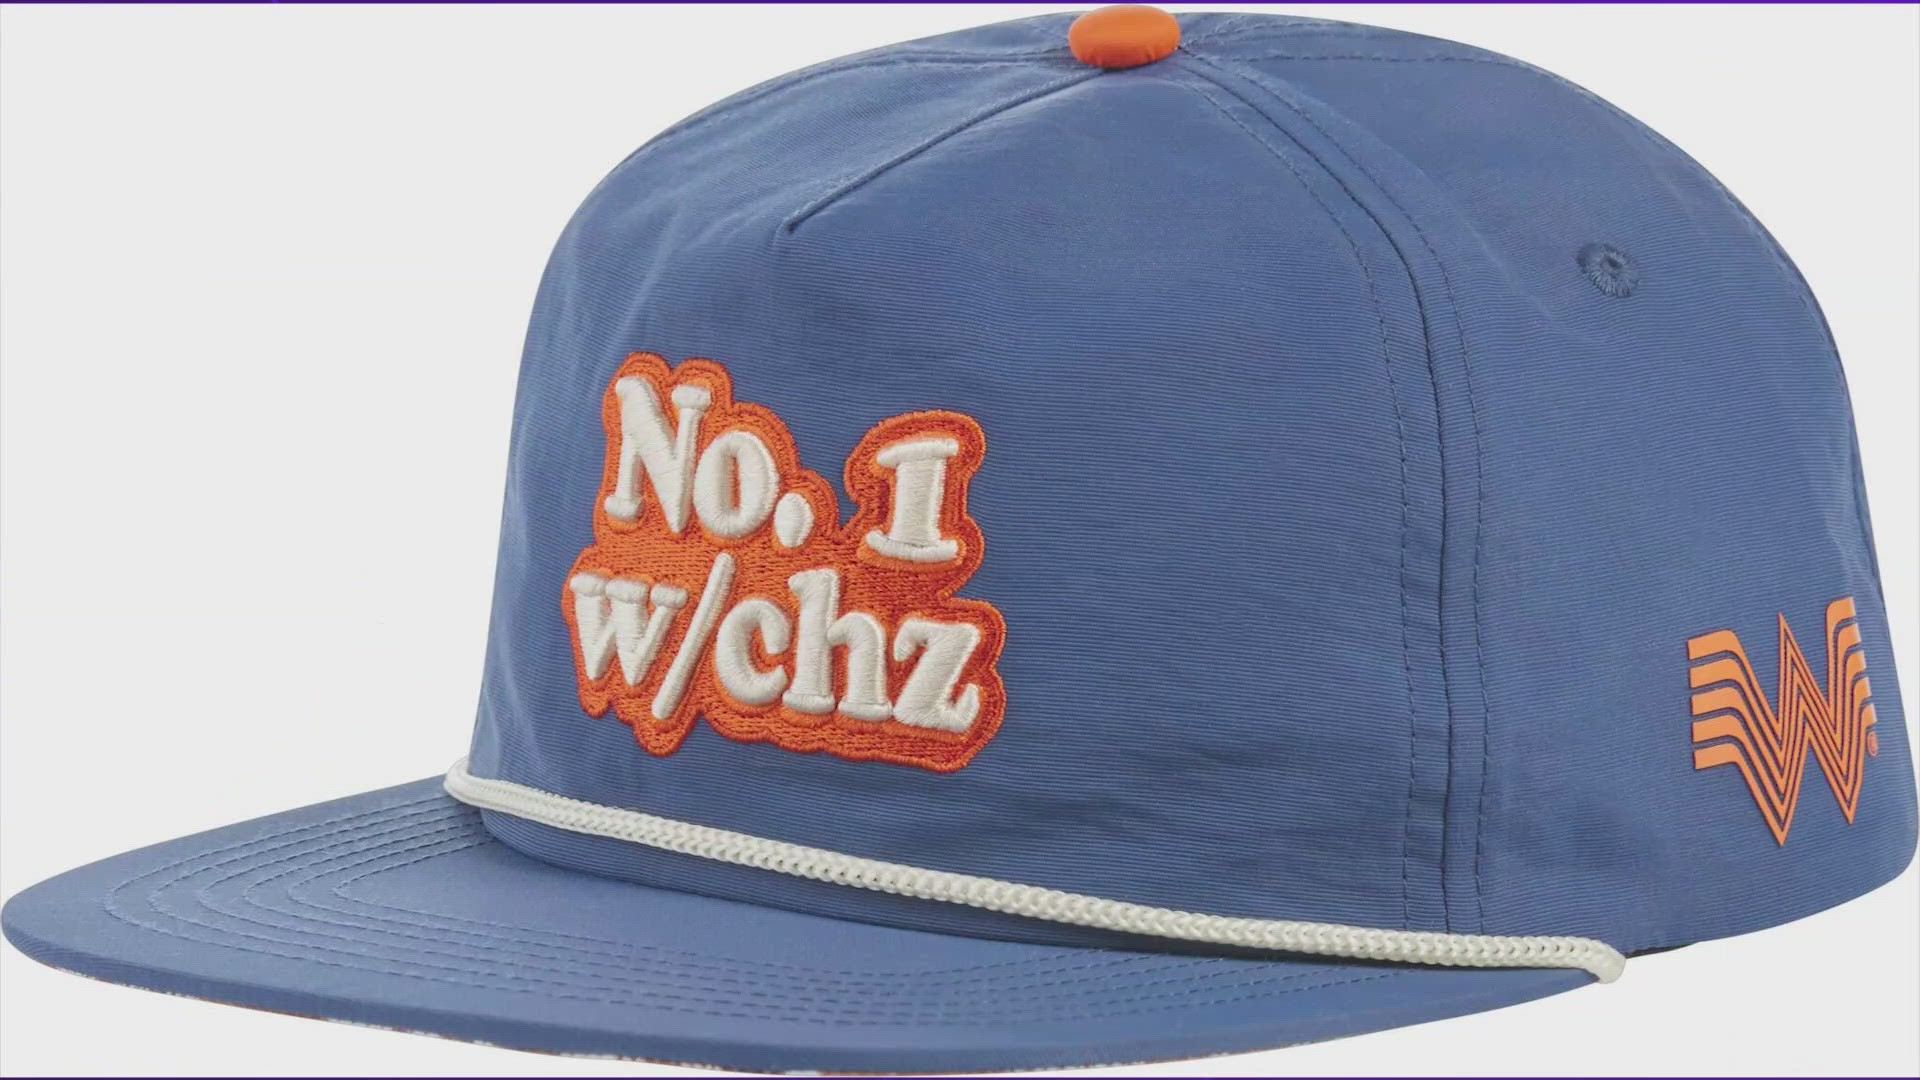 If your favorite Whataburger meal is a "No. 1 w/ chz," then you're going to want to start putting some money aside for the burger chain's new collection of swag.